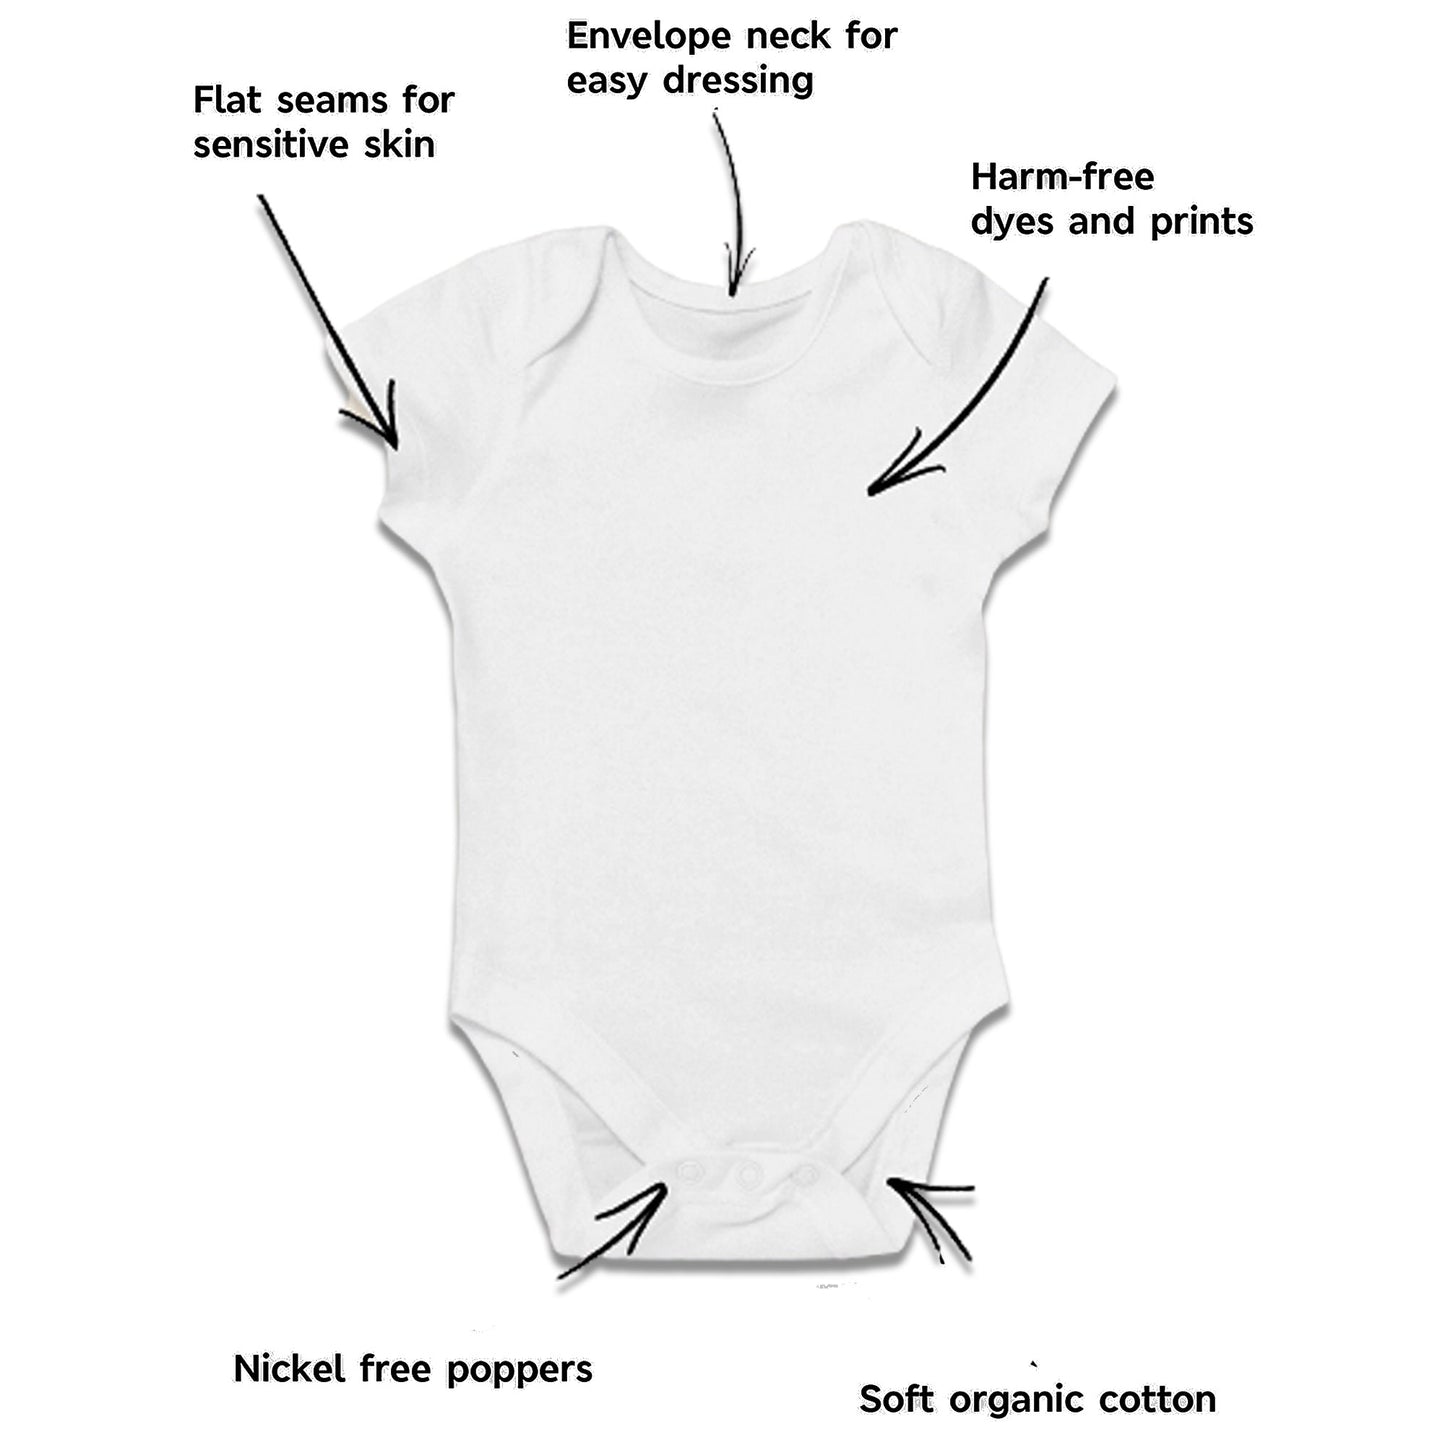 Cricket World Cup Personalised Baby Grow